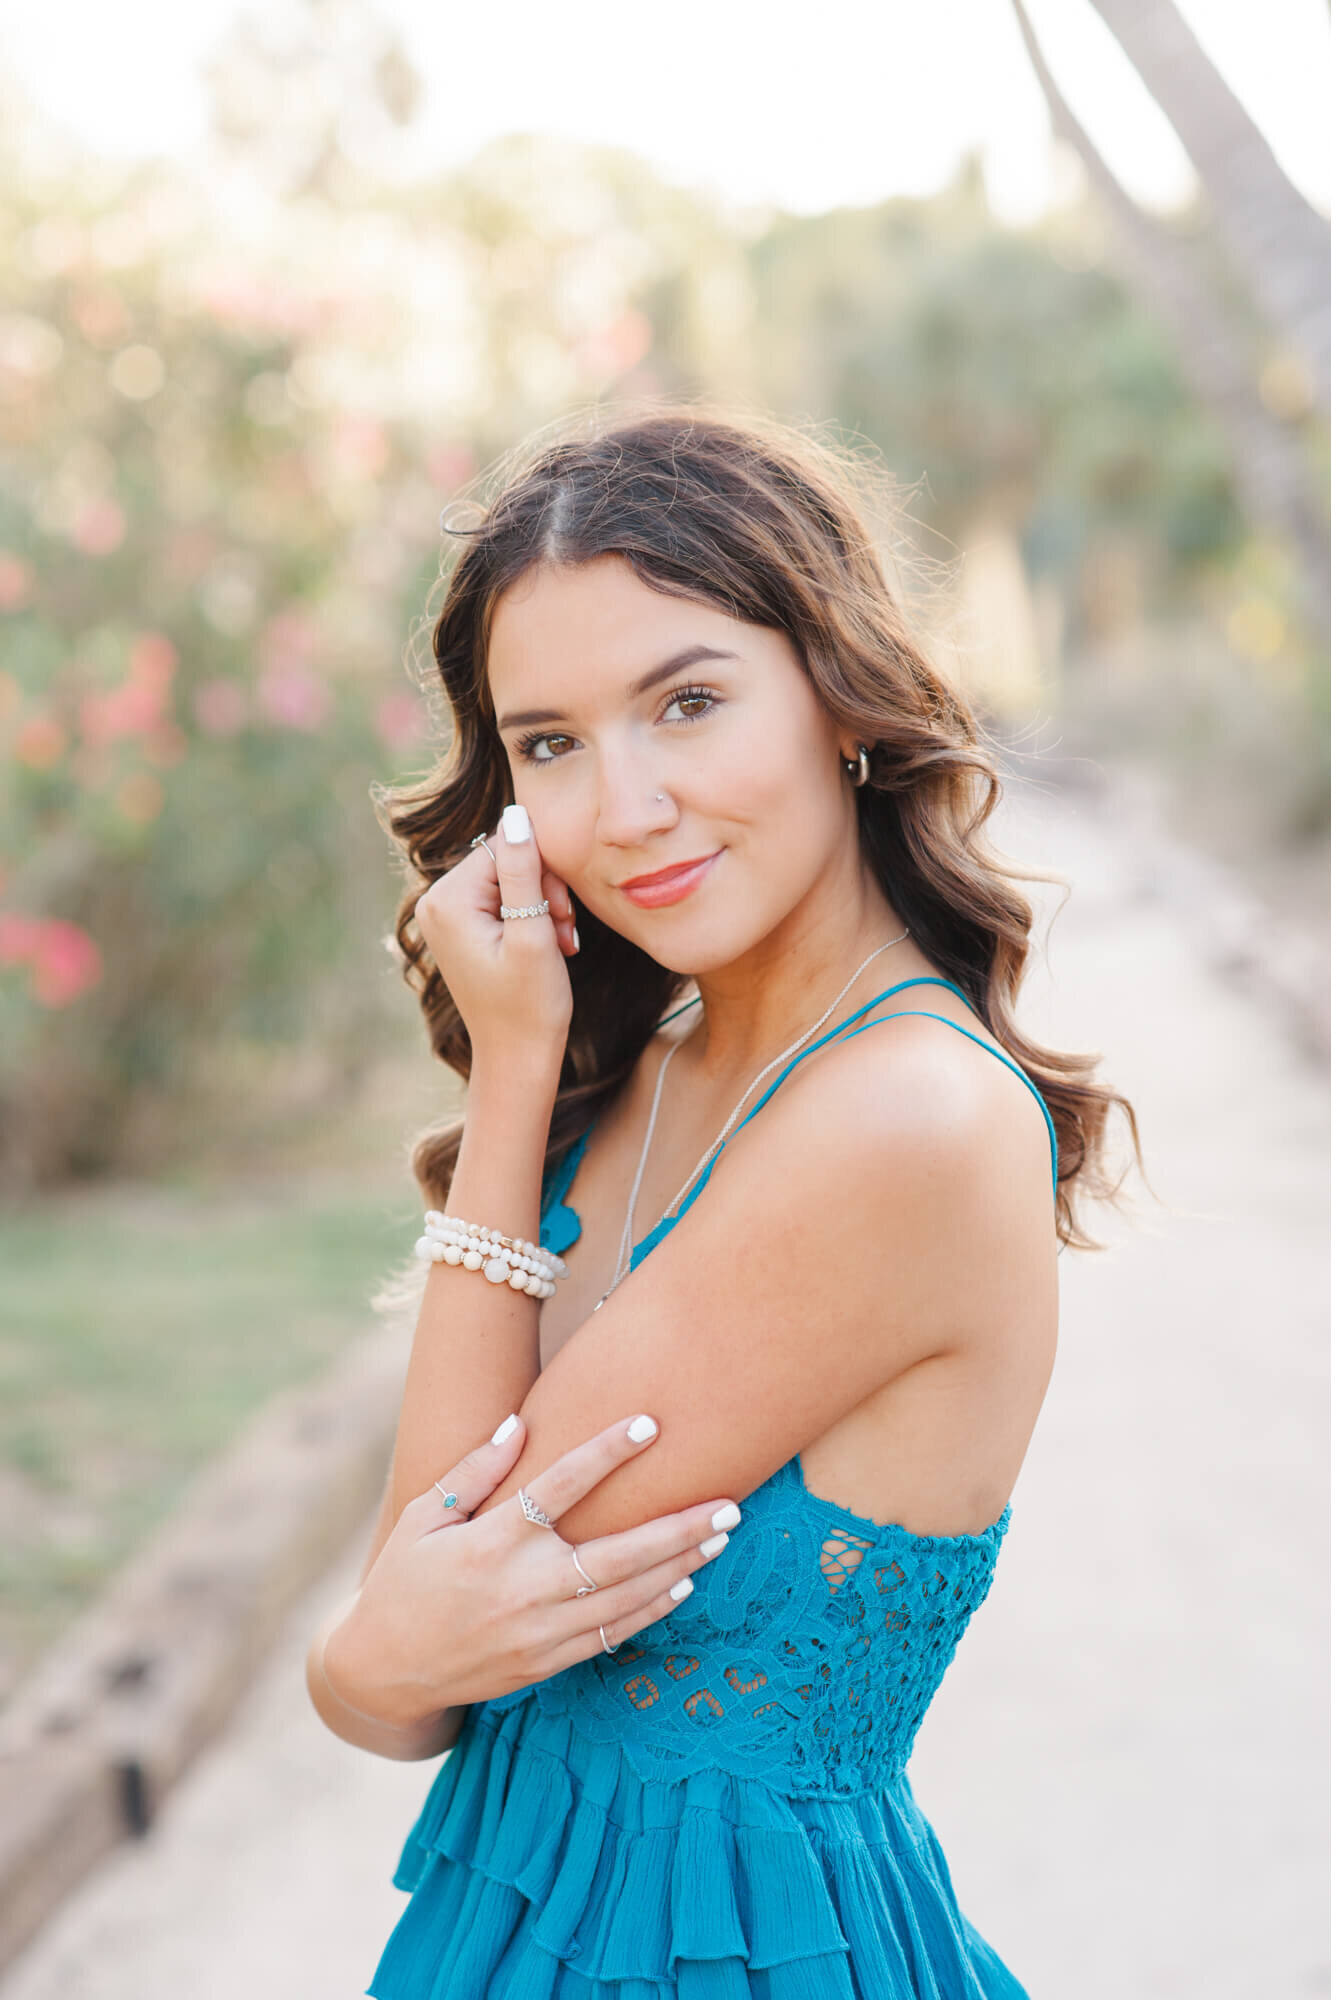 Senior girl stands posing for a portrait with her hand on her cheek on beach path